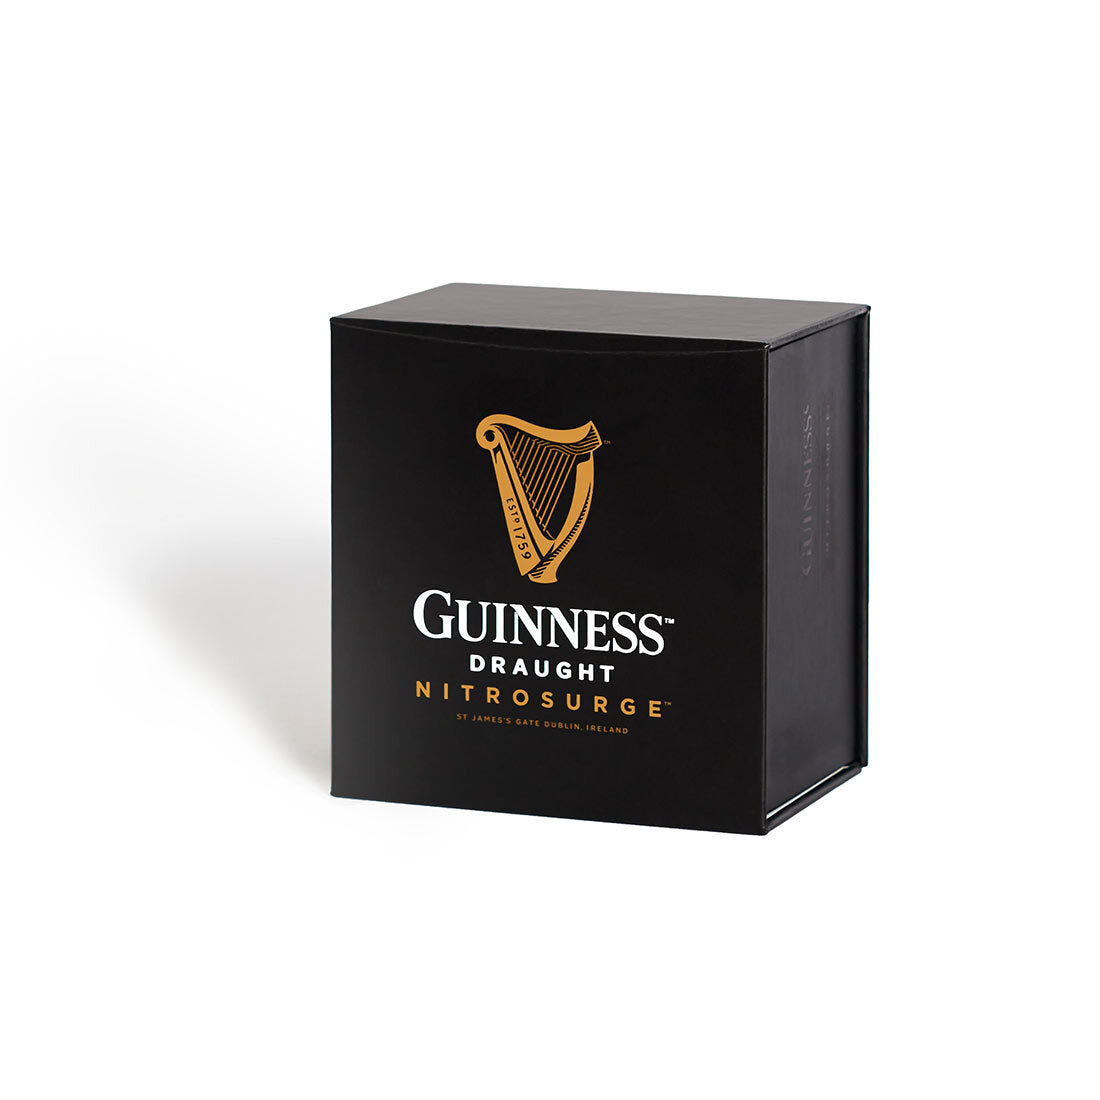 A Guinness Nitrosurge Unit gift box featuring the iconic Guinness Nitrosurge logo, designed to enhance your pouring experience. (Brand Name: Guinness UK)